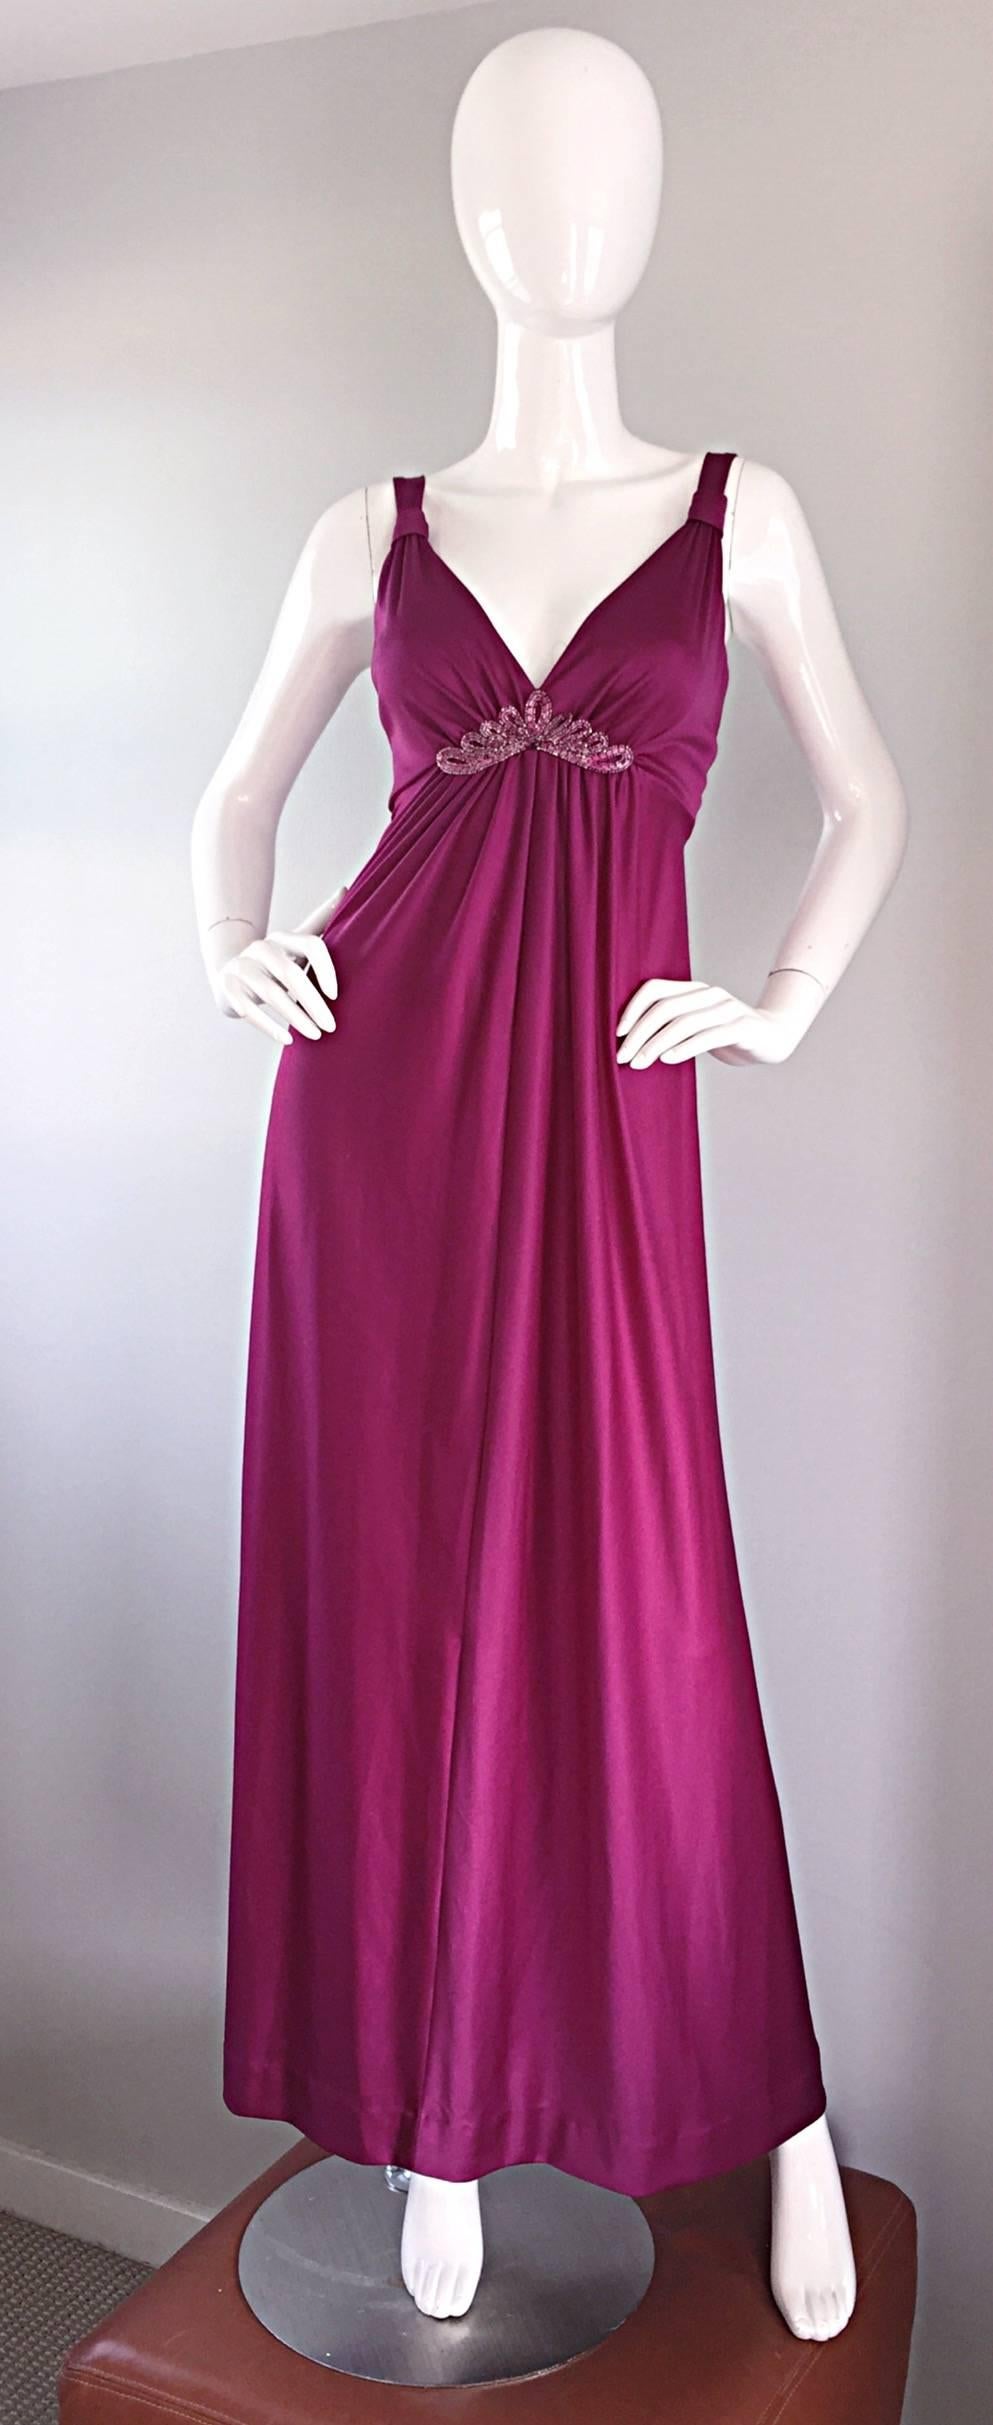 Sexy 1970s wine colored Grecian maxi dress, and matching shrug! Slinky maxi dress, with beading detail at the bust. Flattering gathers throughout the bodice, which not only look good, but leave some room to breathe! Full metal zipper up the back,